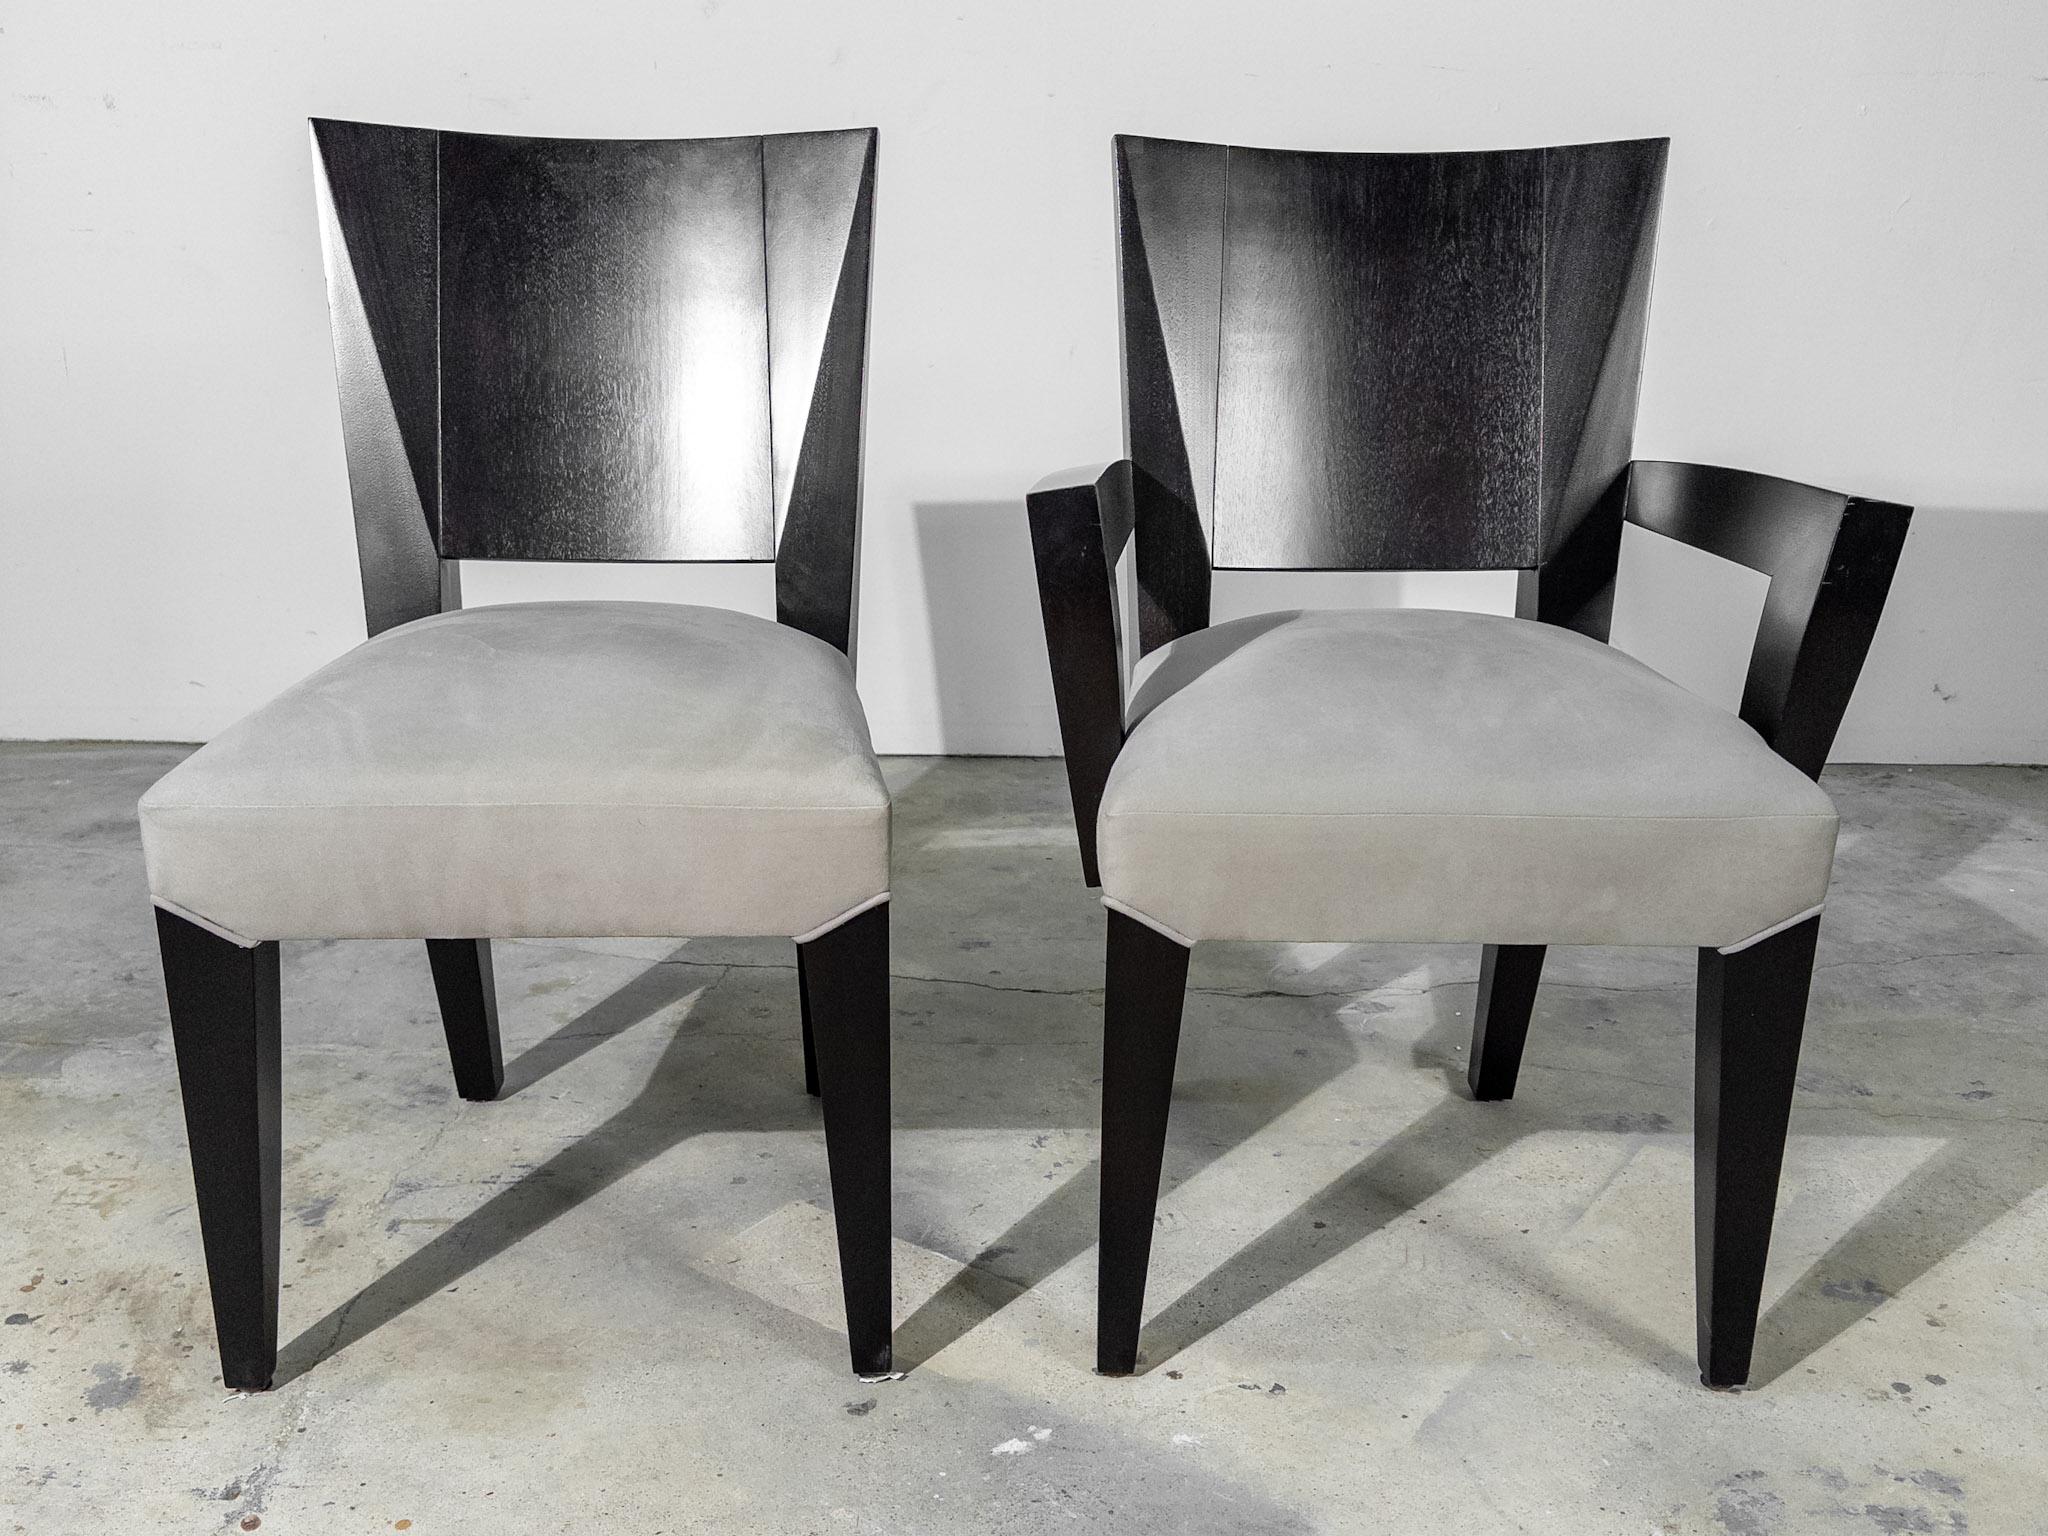 Stained Set of 10 Ocean Dining Chairs by Dakota Jackson (2 Arm Chairs, 8 Side Chairs) For Sale